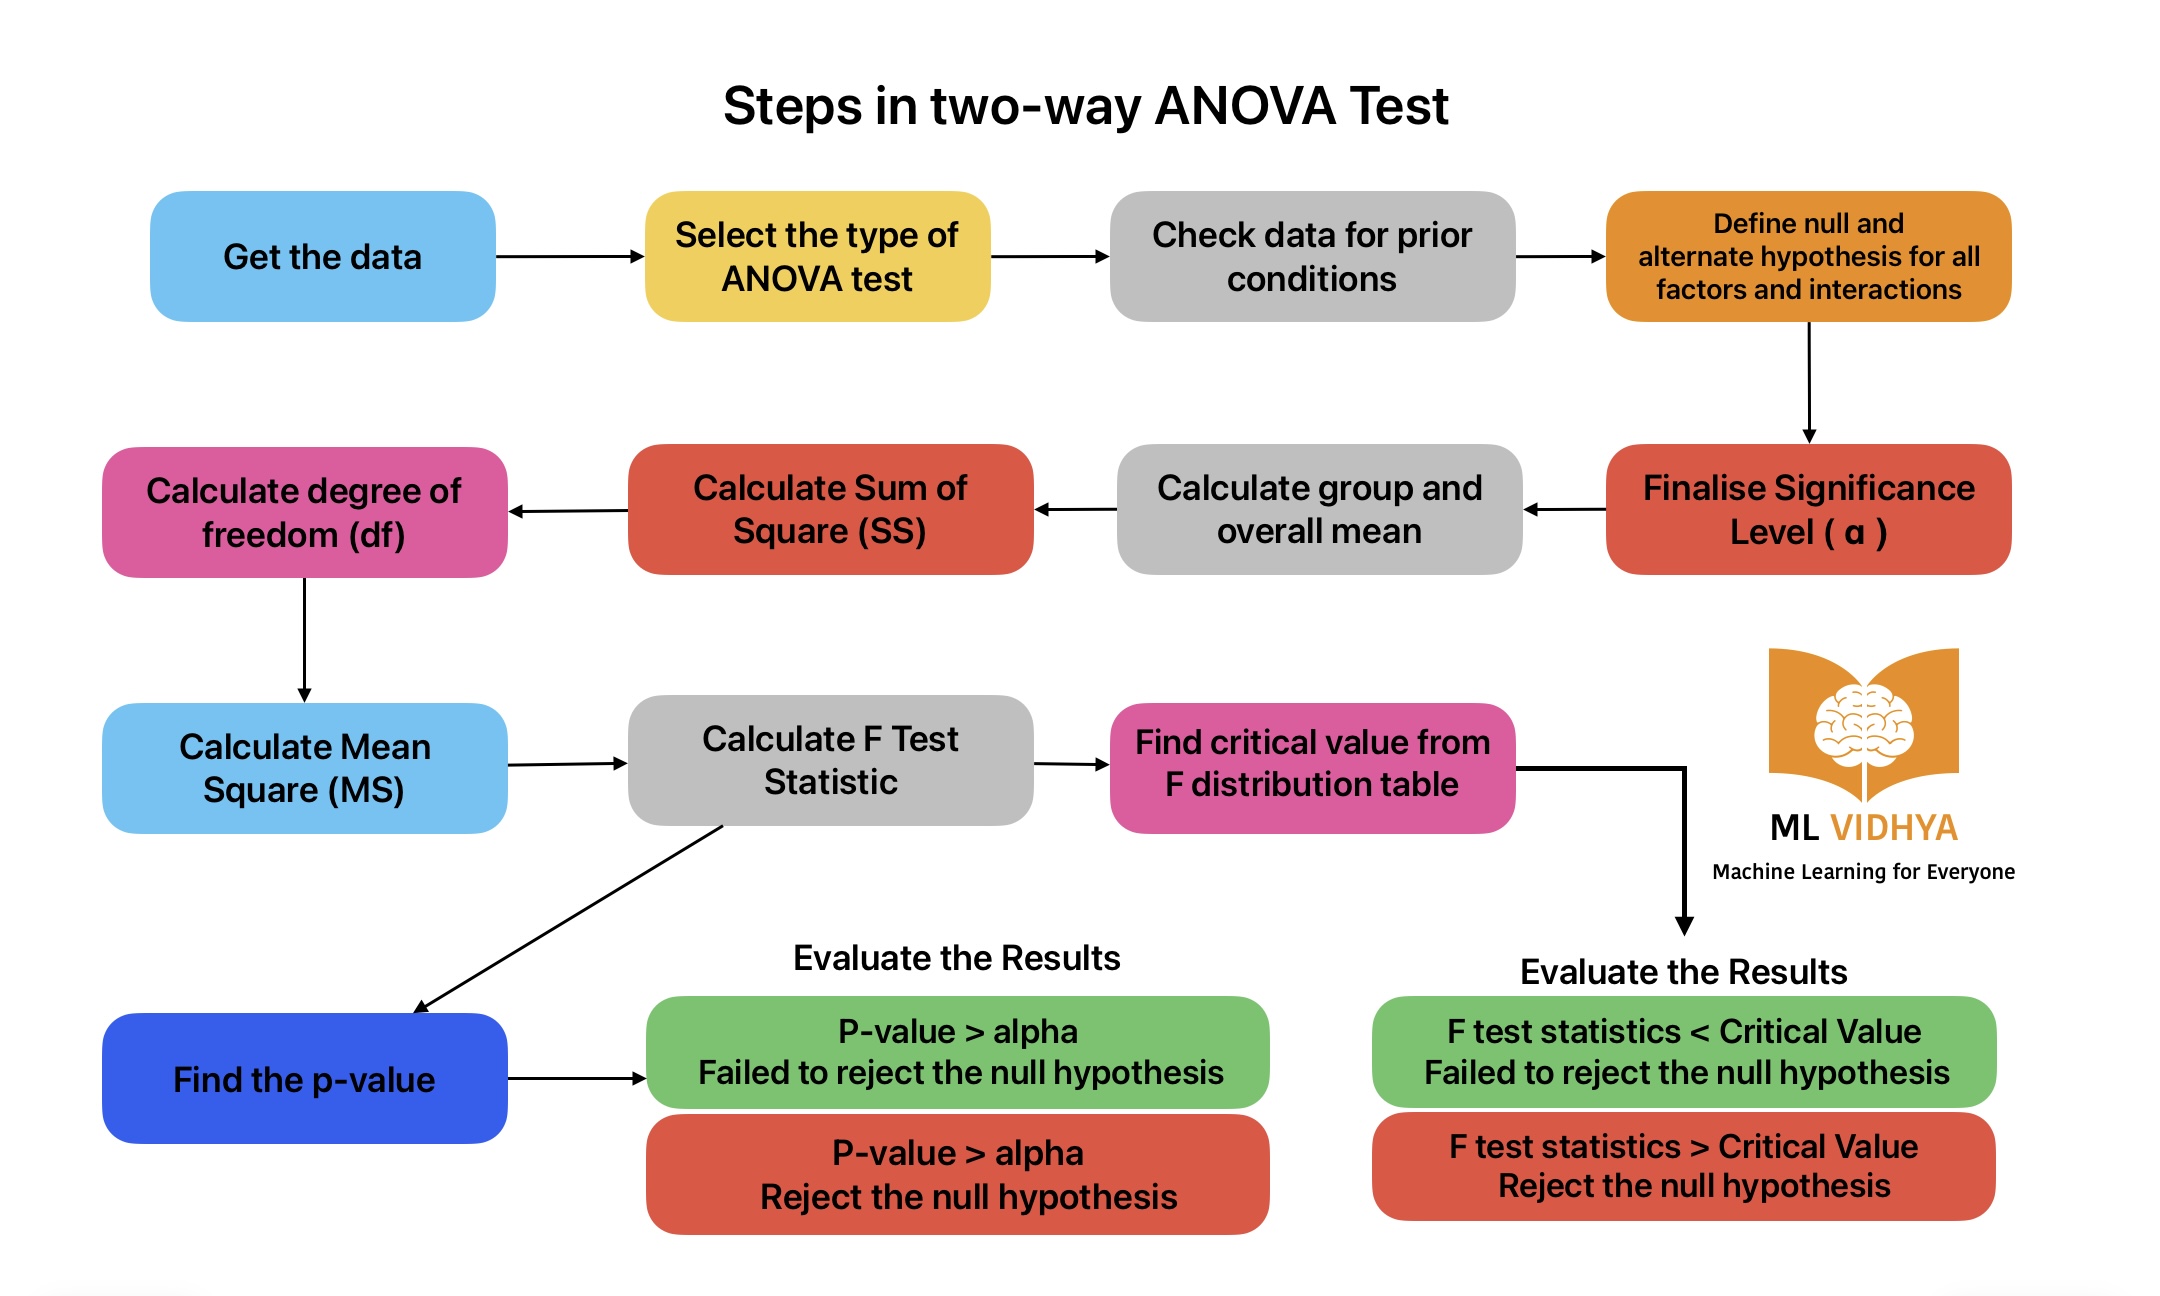 This image shows steps in Two Way ANOVA Test